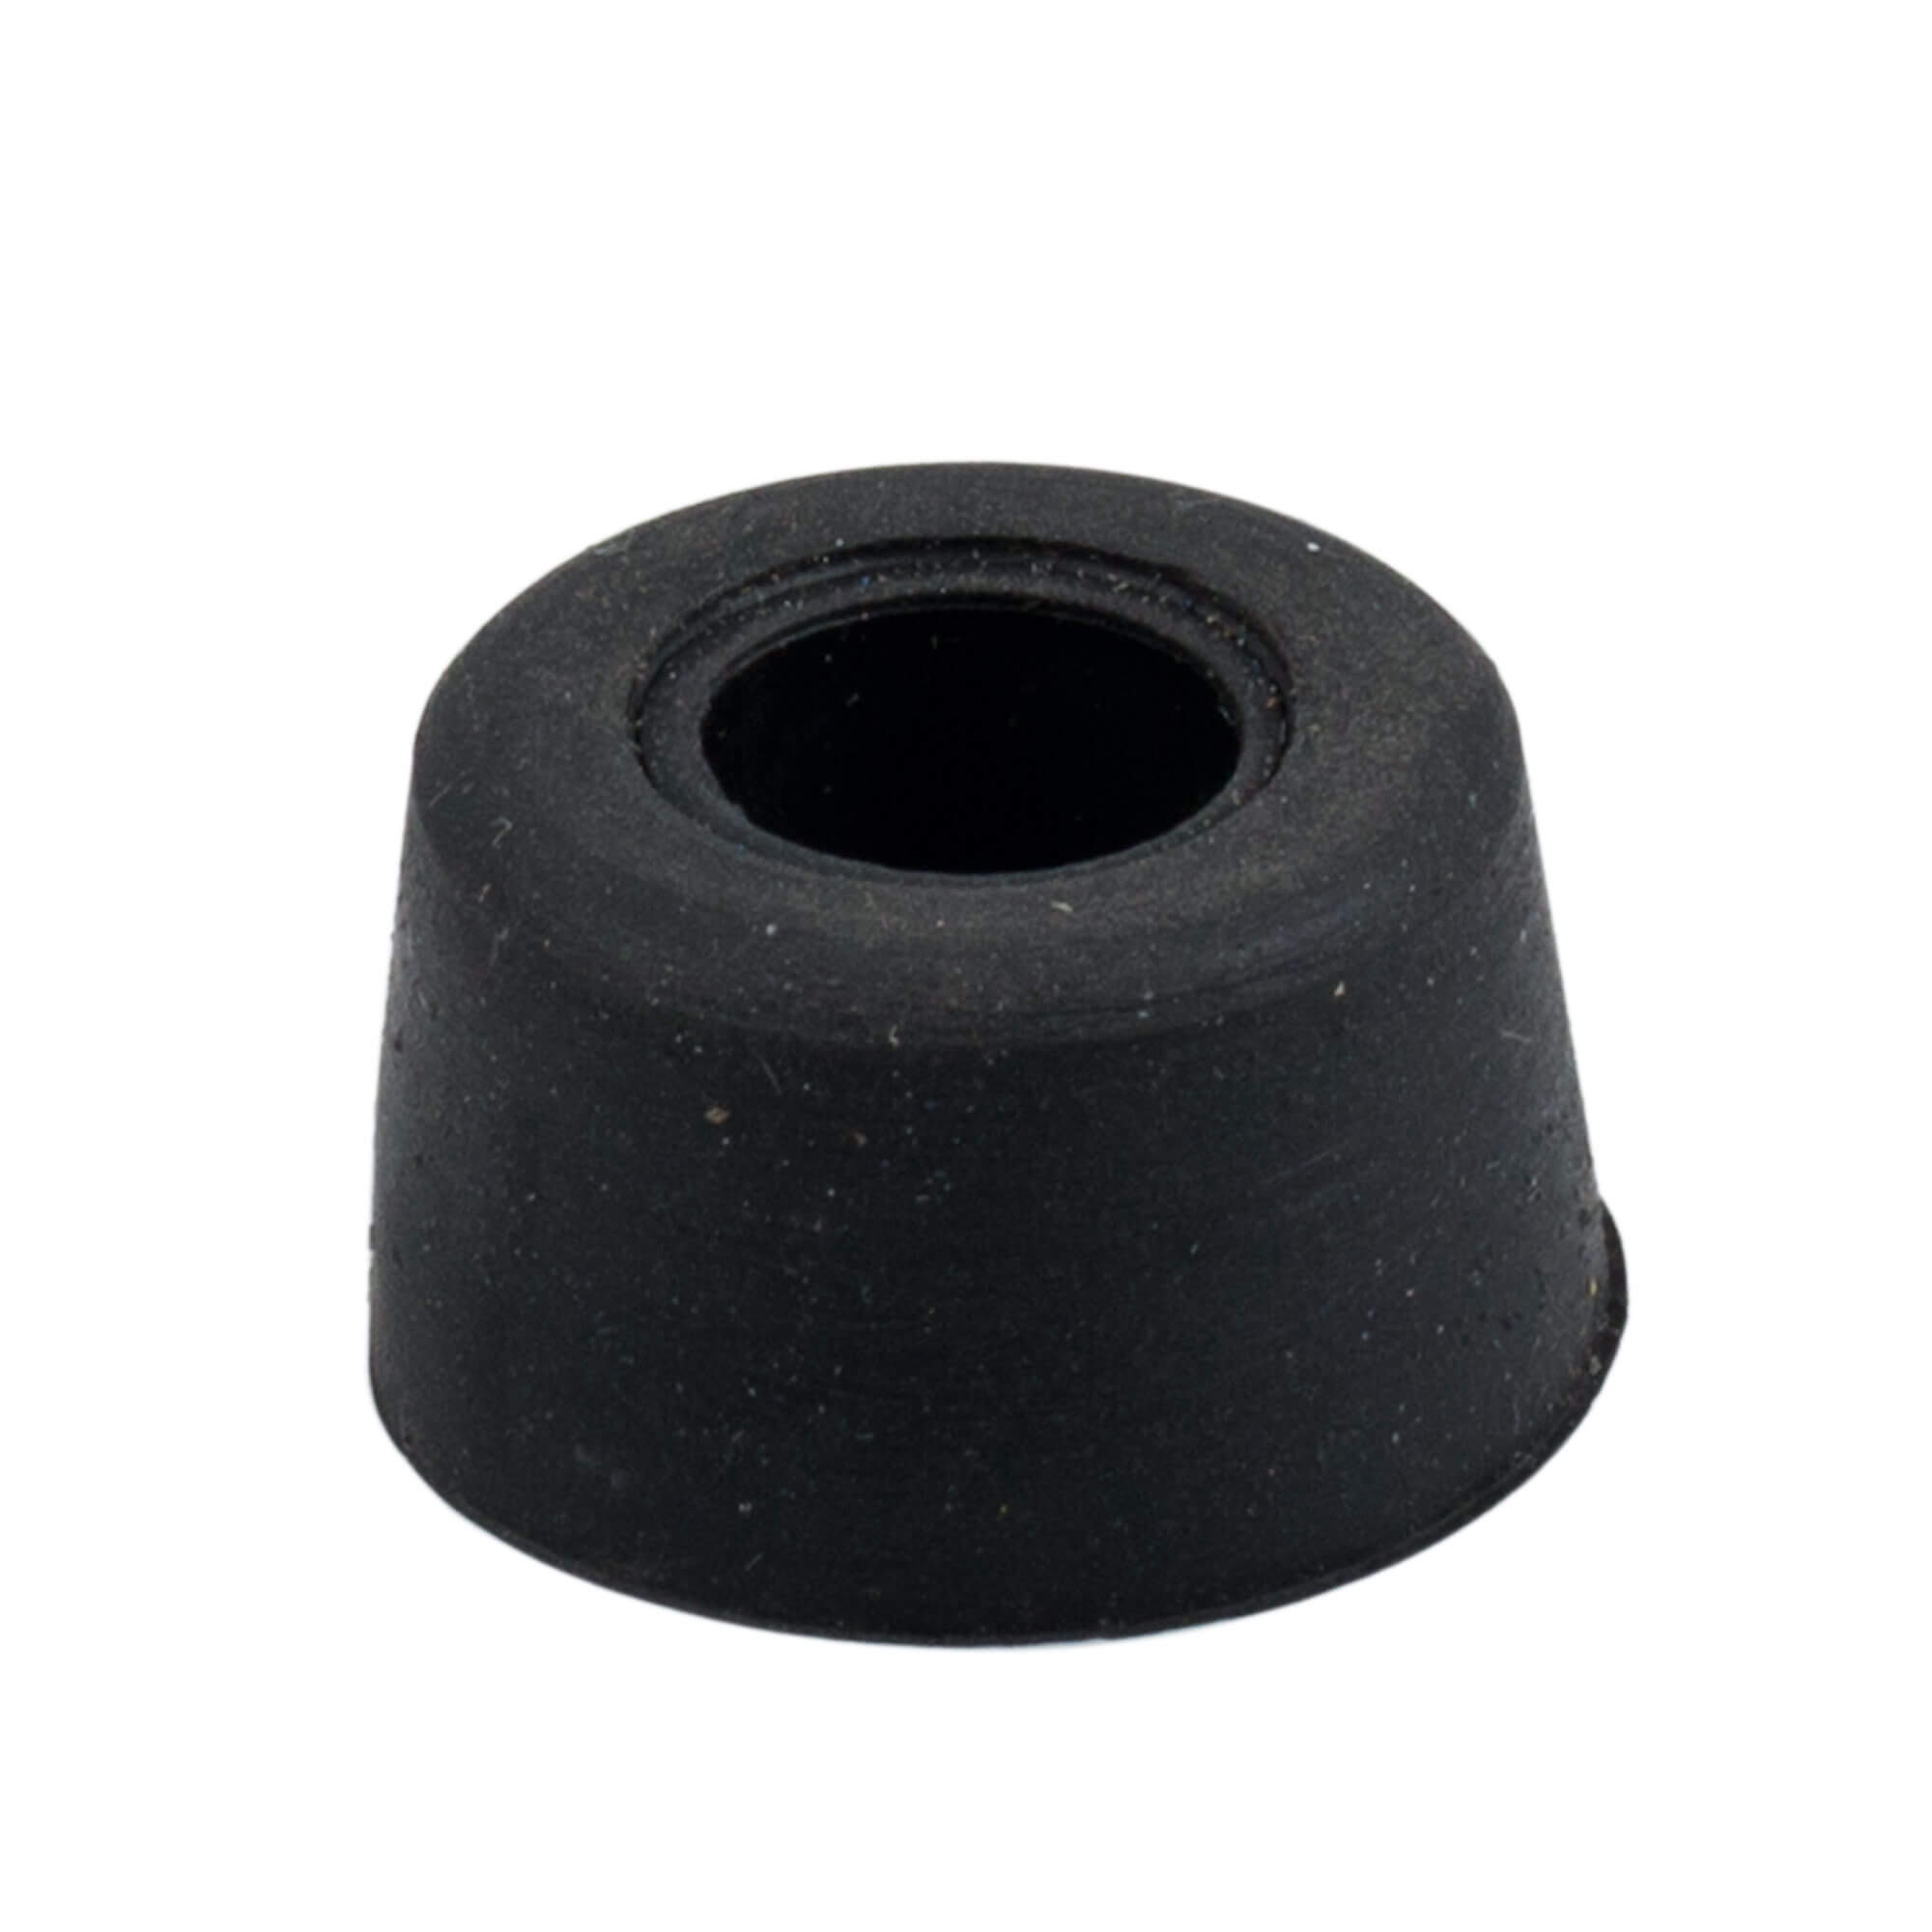 Rubber base - spare part for Cancan manual juicer